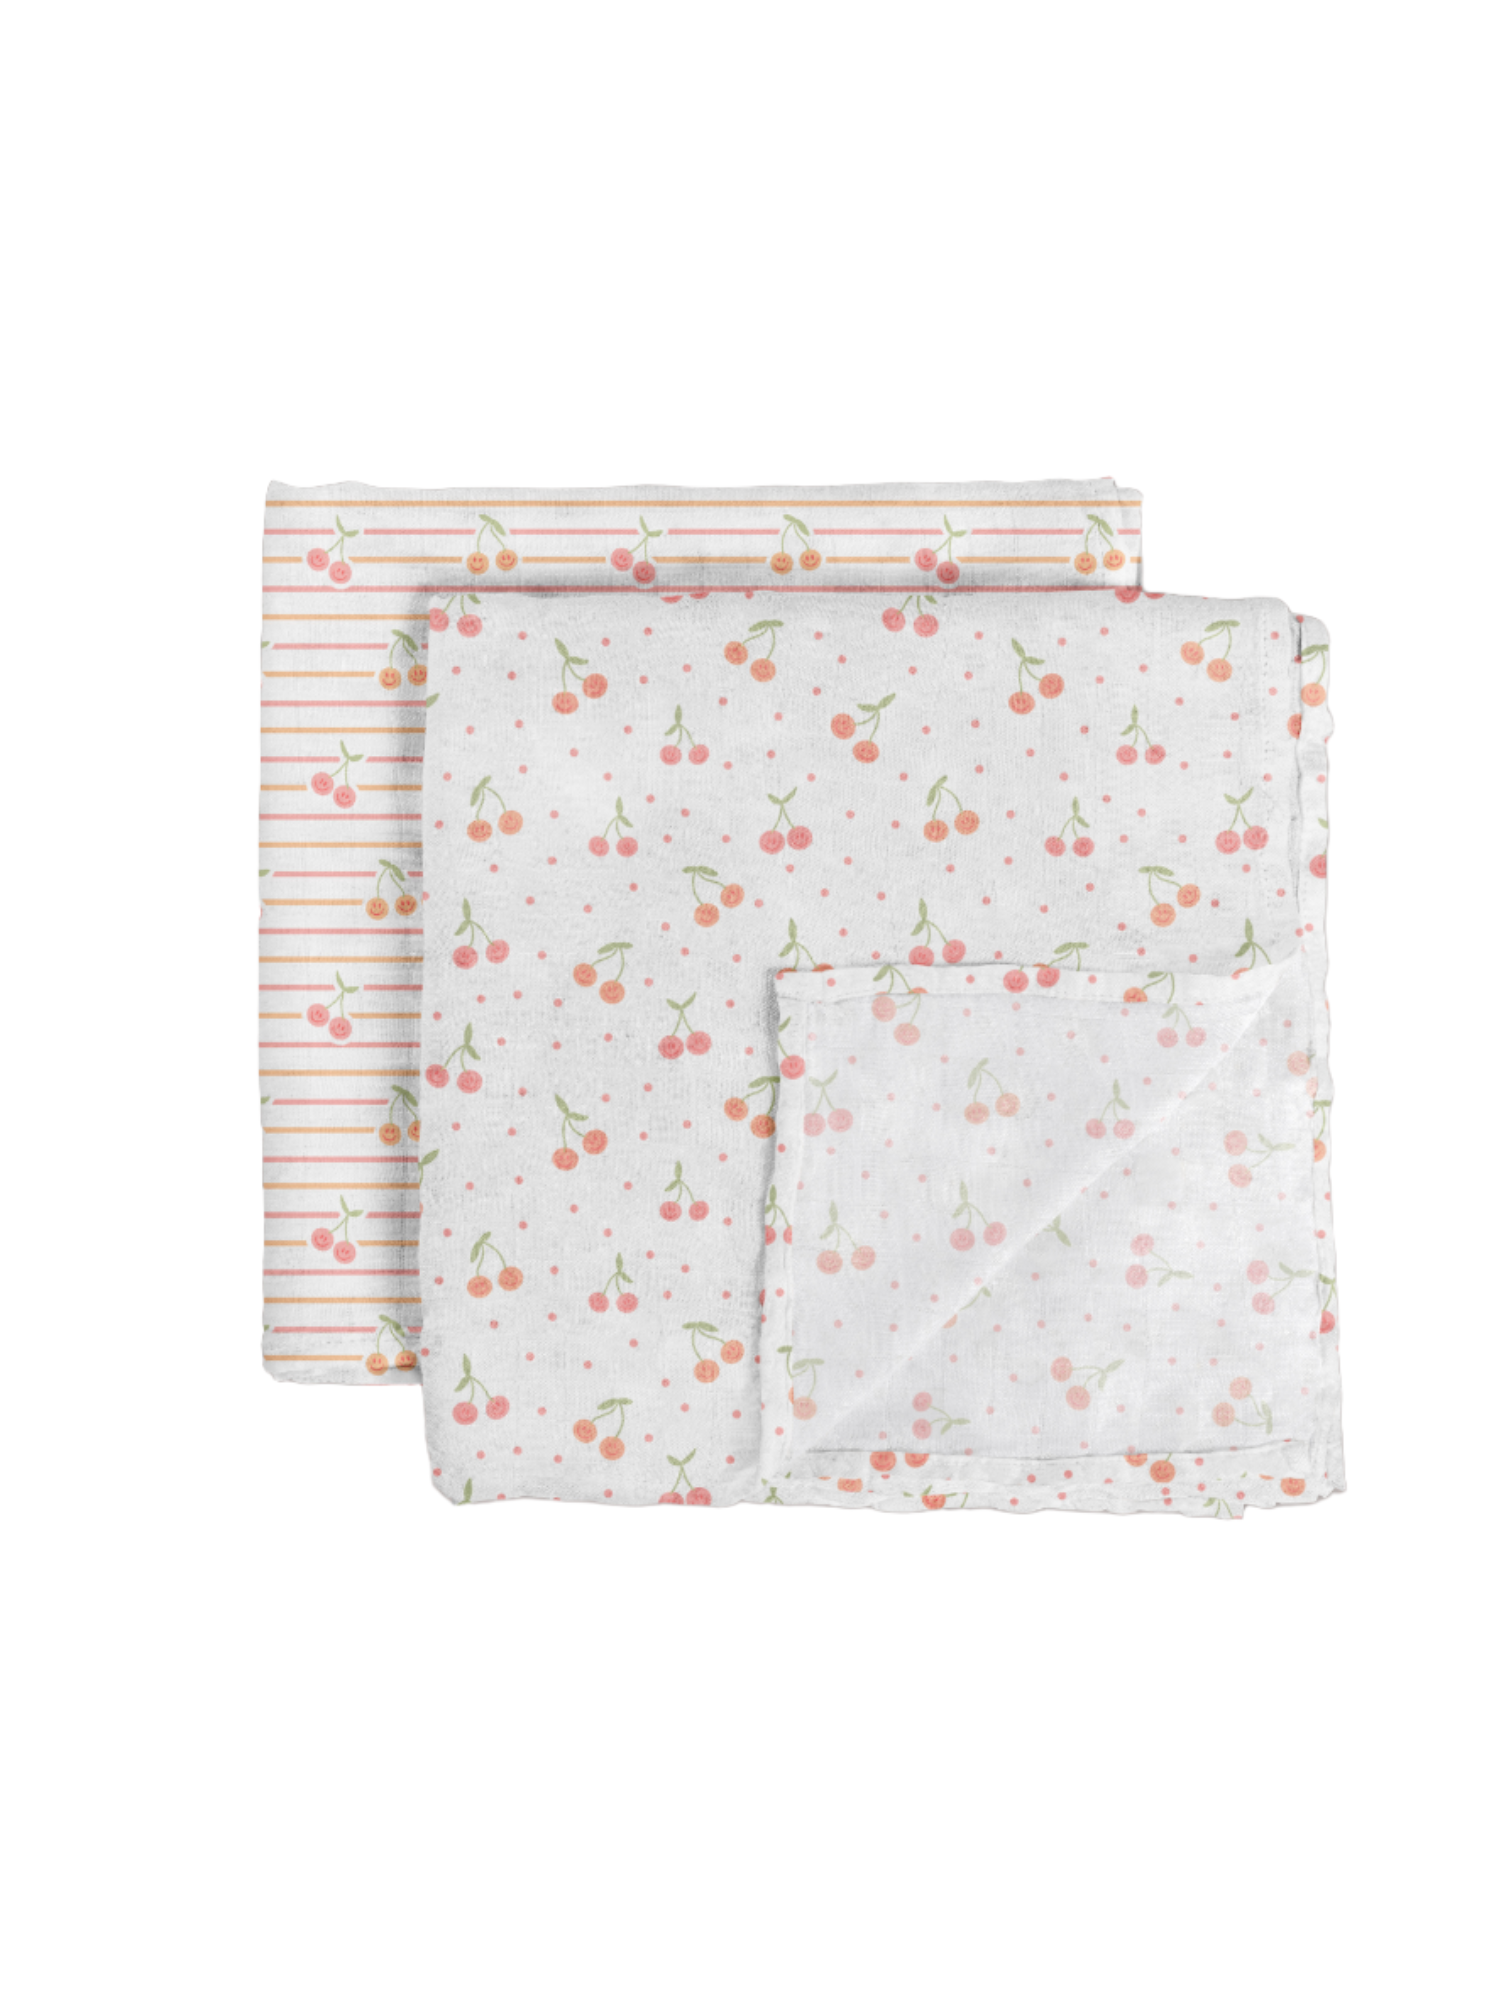 Swaddle Blanket Set - Cherry Cute By Doodle By Meg